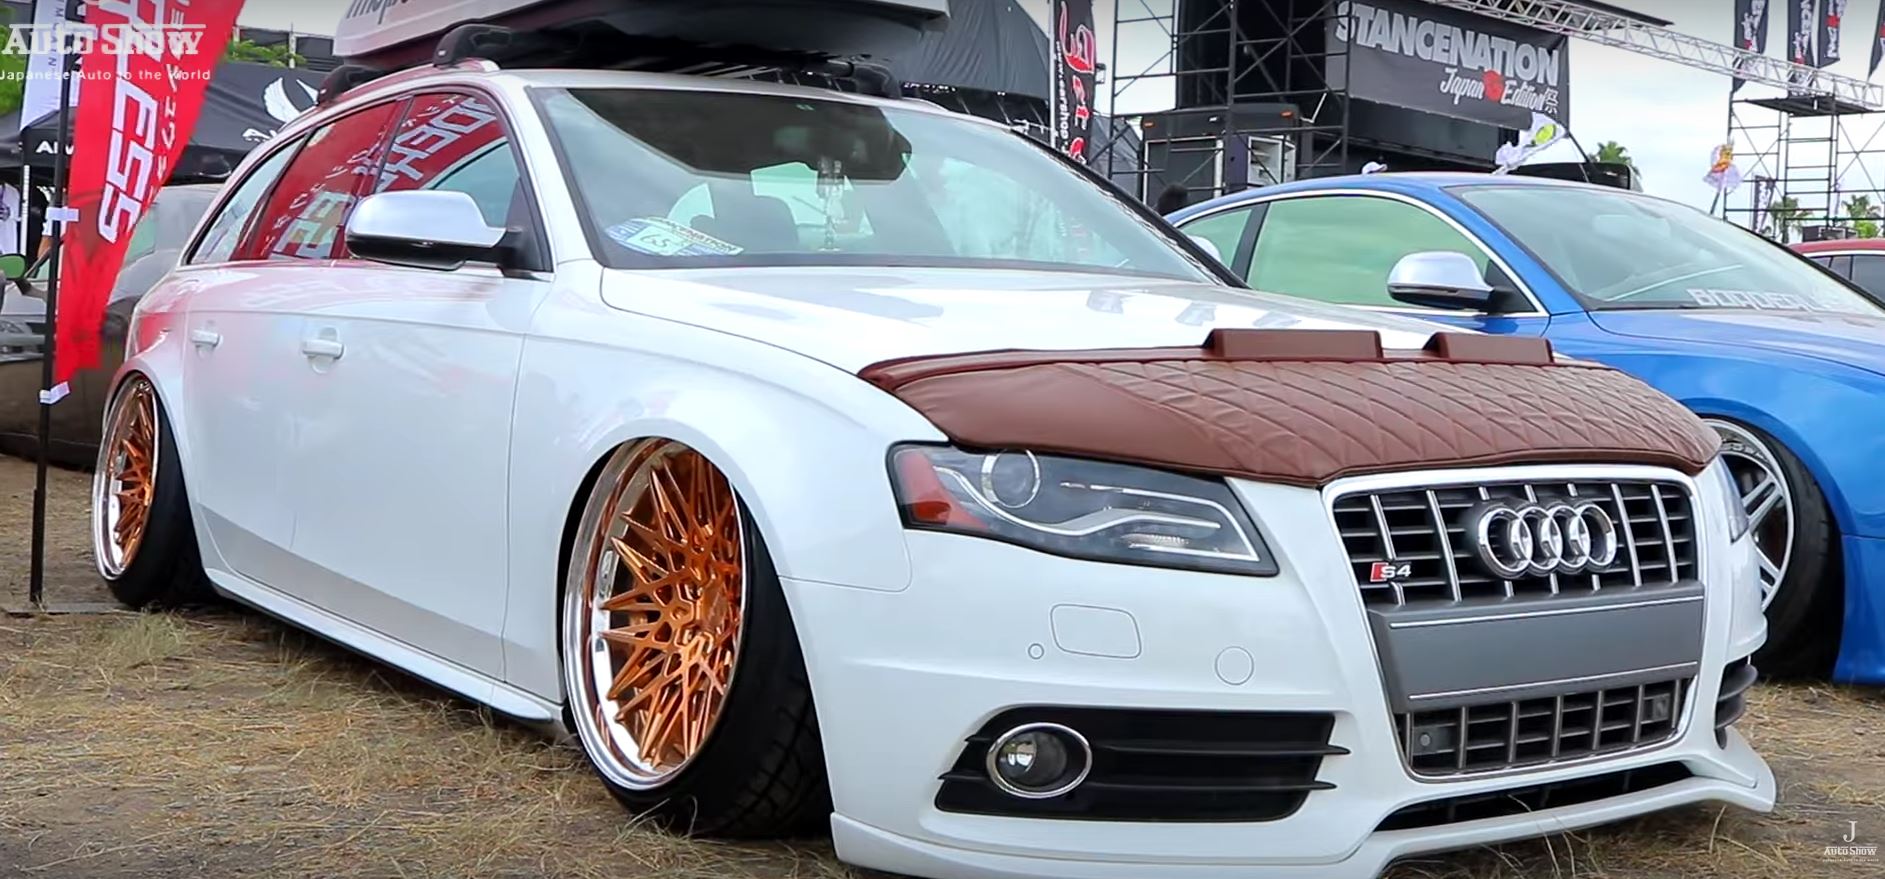 Audi S4 Customized With Leather Car Bra In Japan - autoevolution